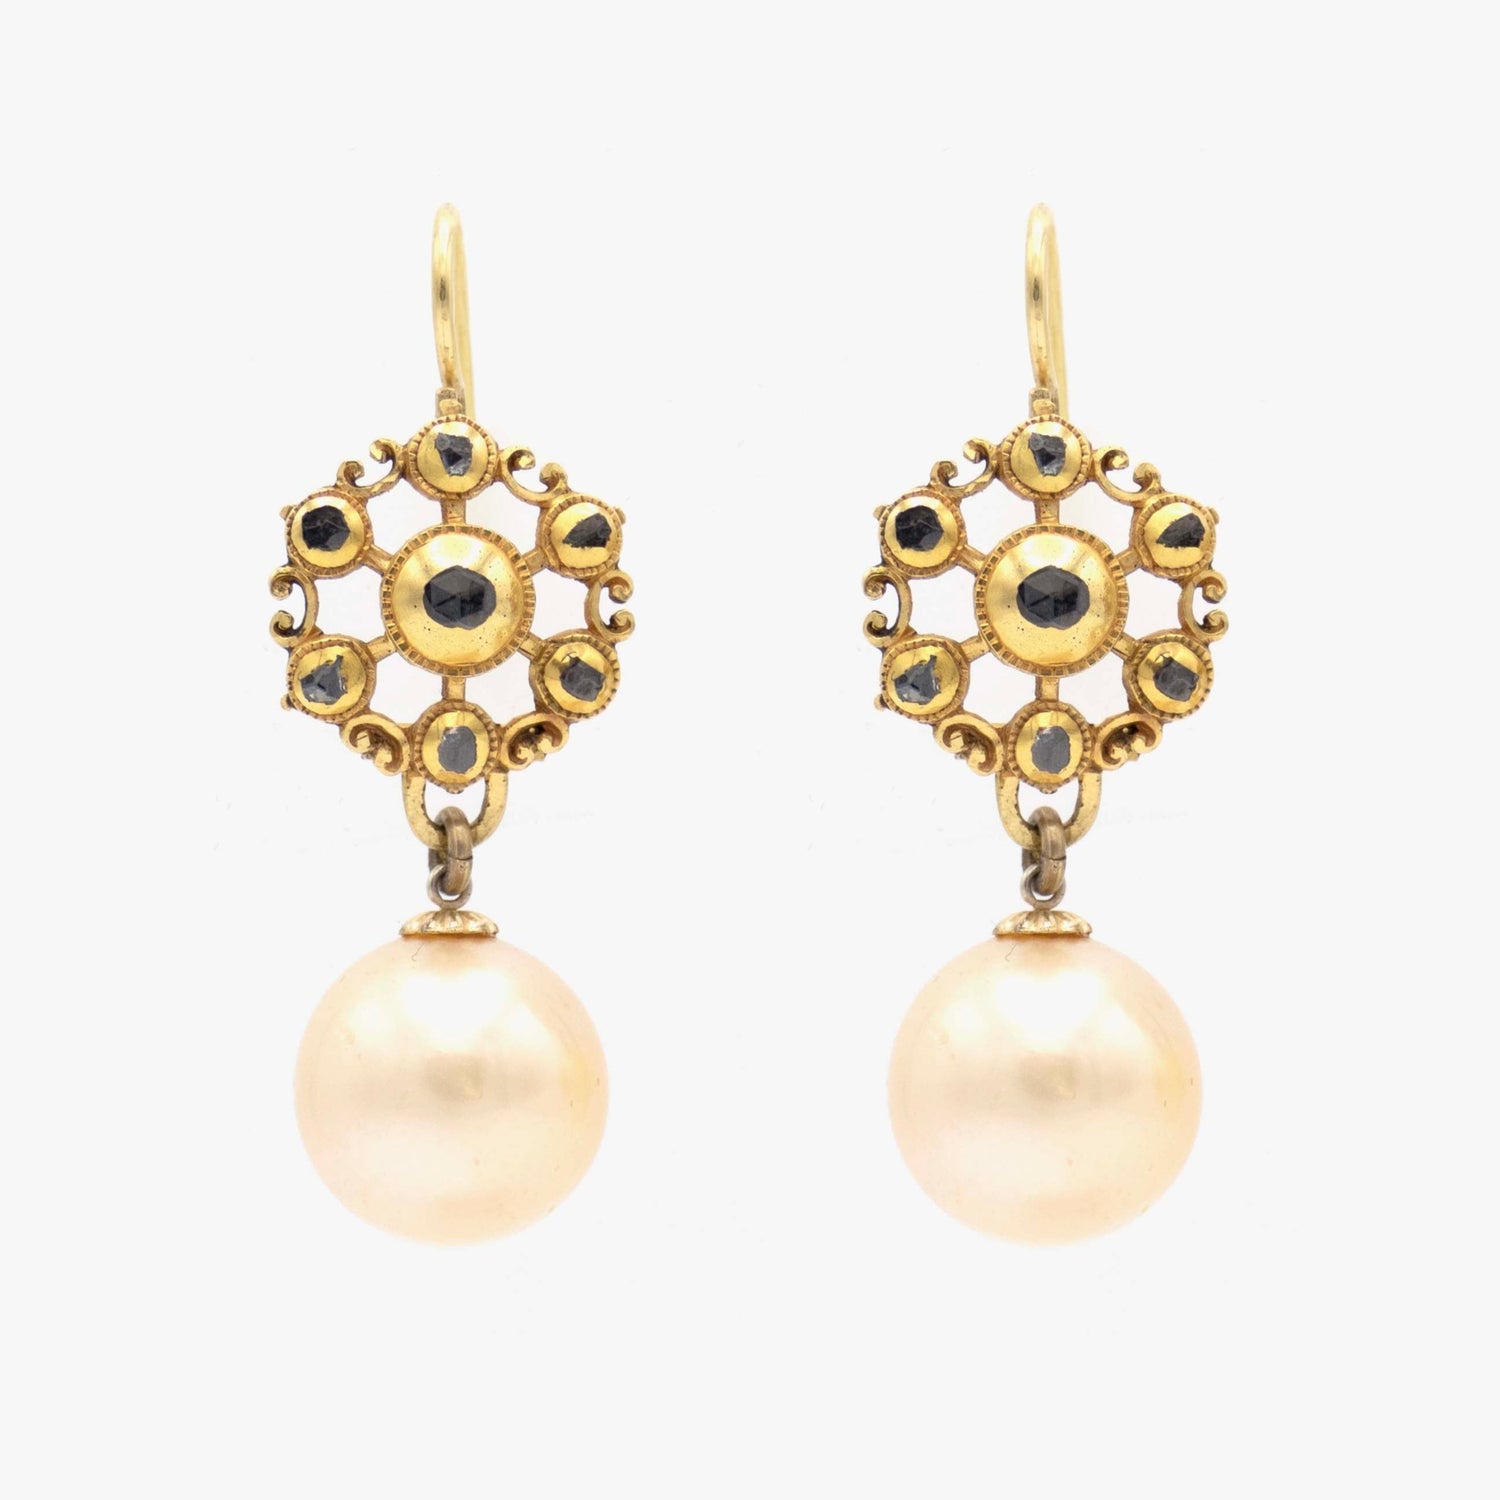 Irit Design Antique 18K Gold and Diamond Earrings with Pearls